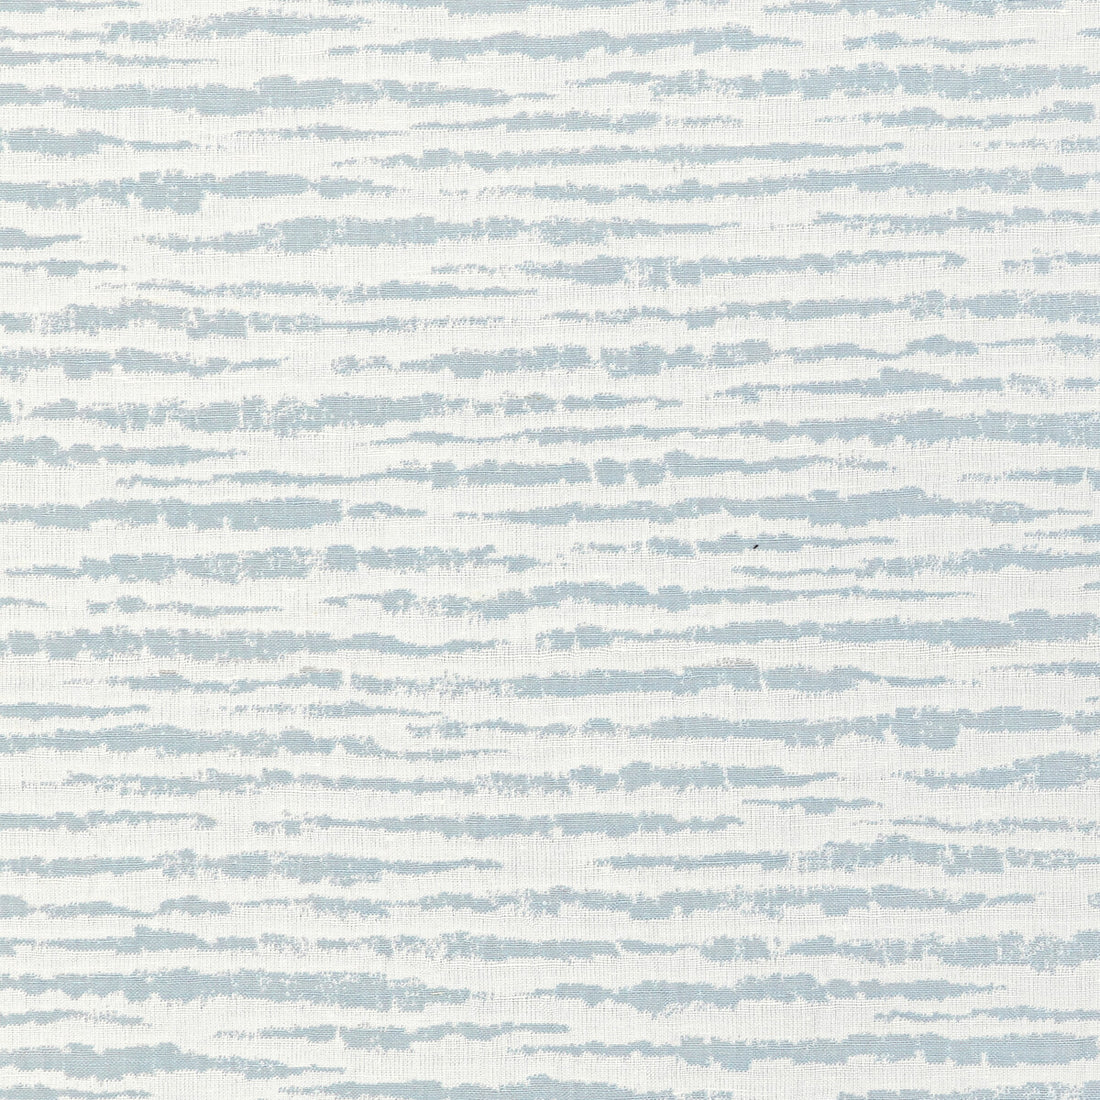 Low Tide fabric in horizon color - pattern 36379.15.0 - by Kravet Design in the Jeffrey Alan Marks Seascapes collection